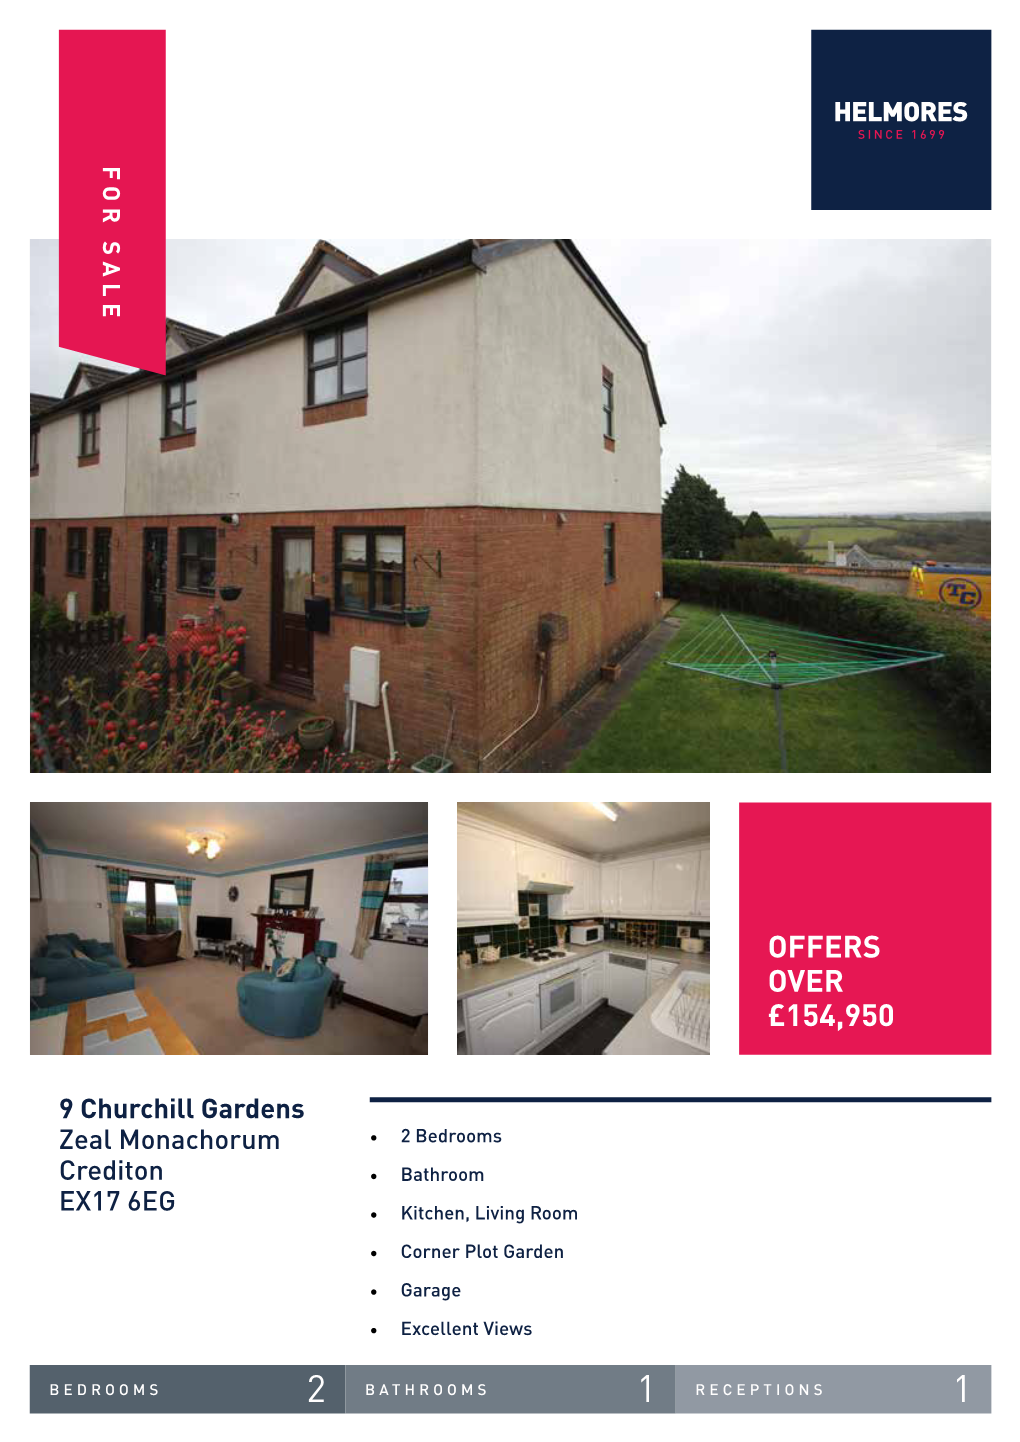 Offers Over £154,950